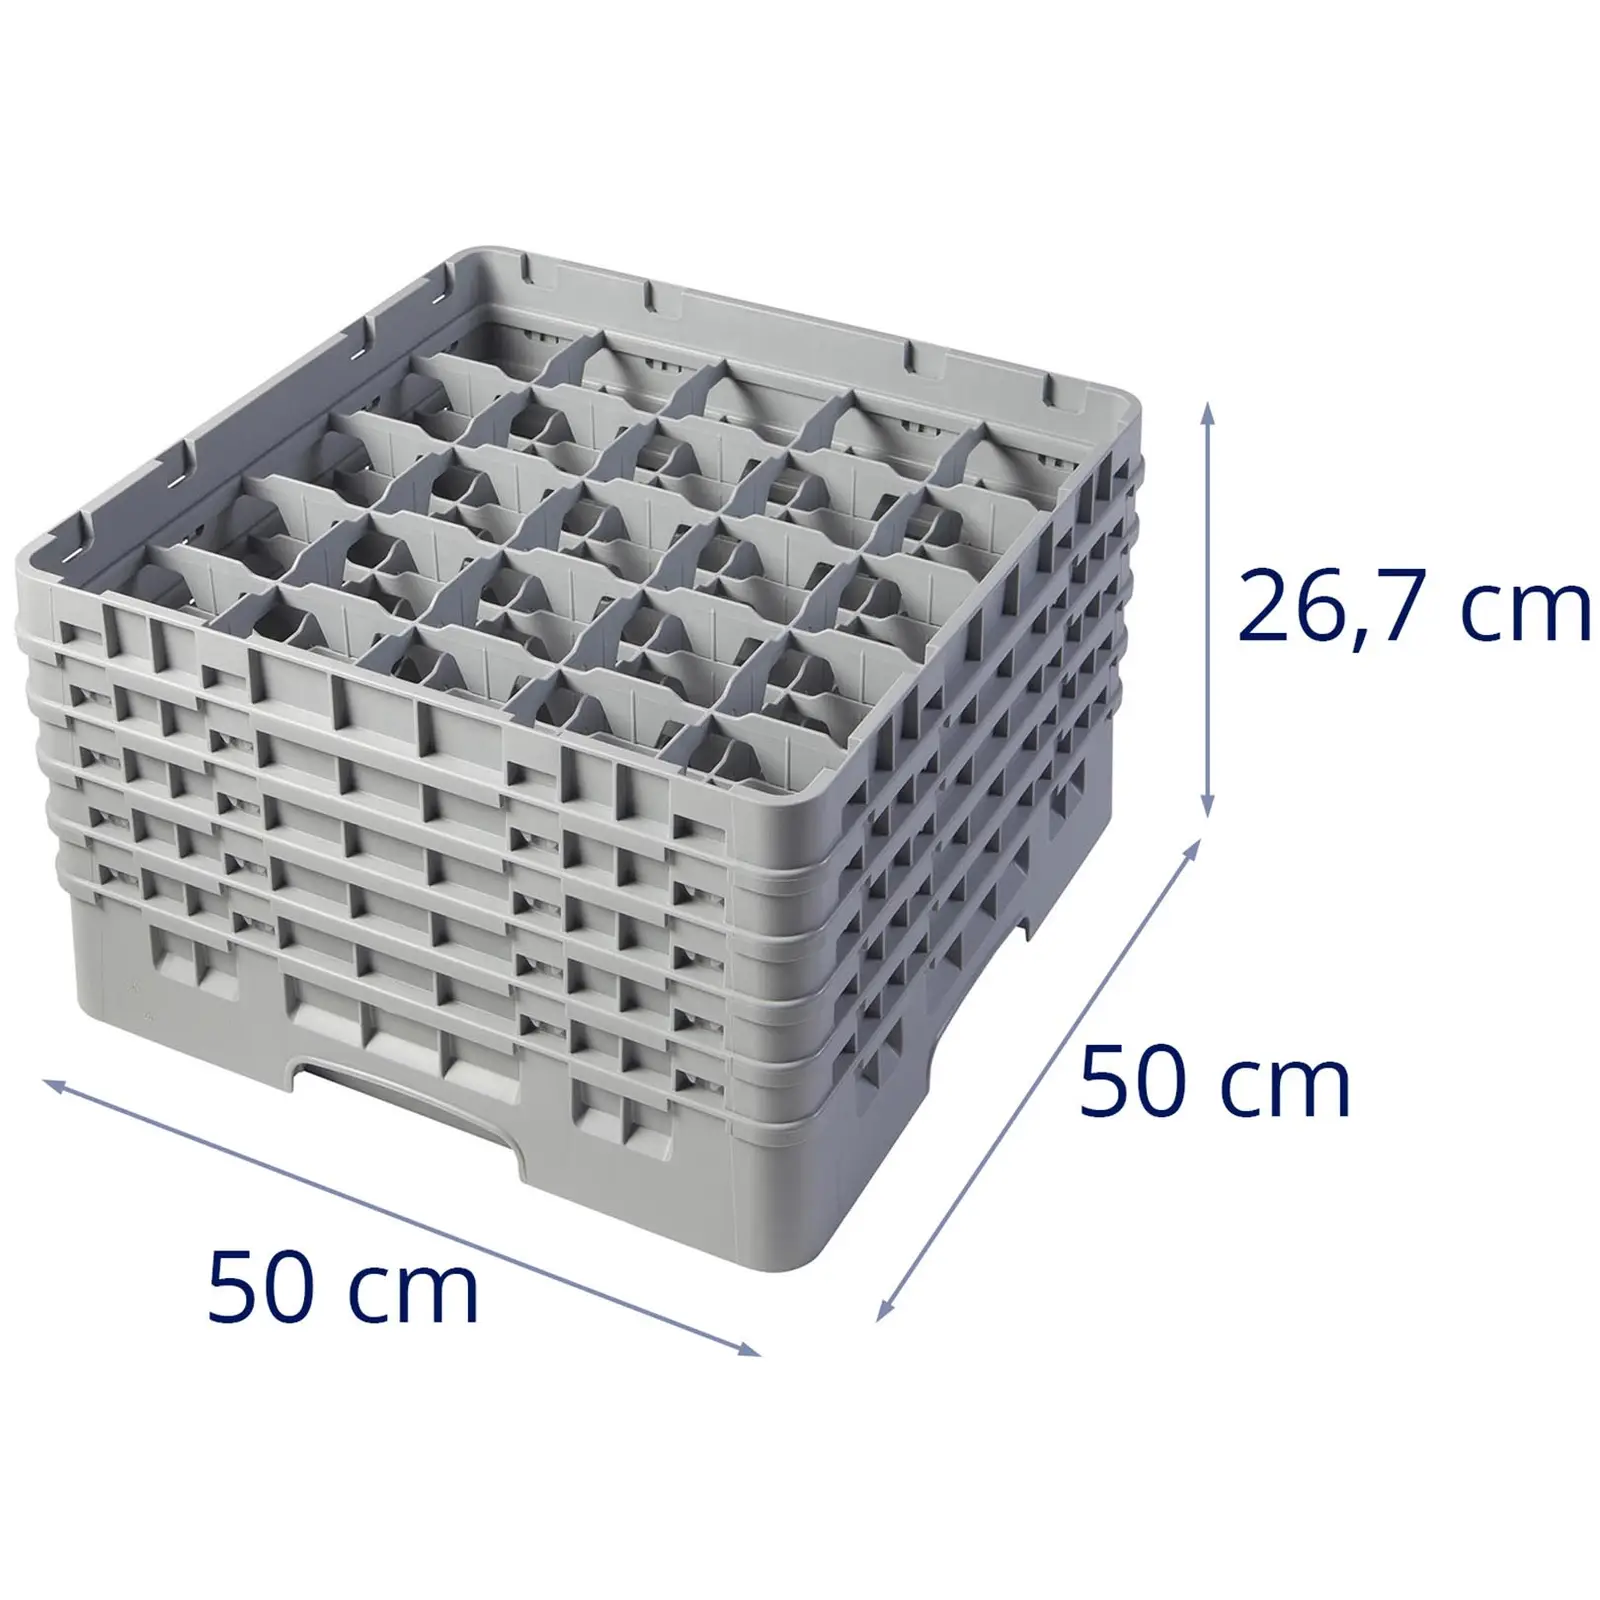 Glass Rack - 25 compartments - 50 x 50 x 26,7 cm - glass height: 23,8 cm